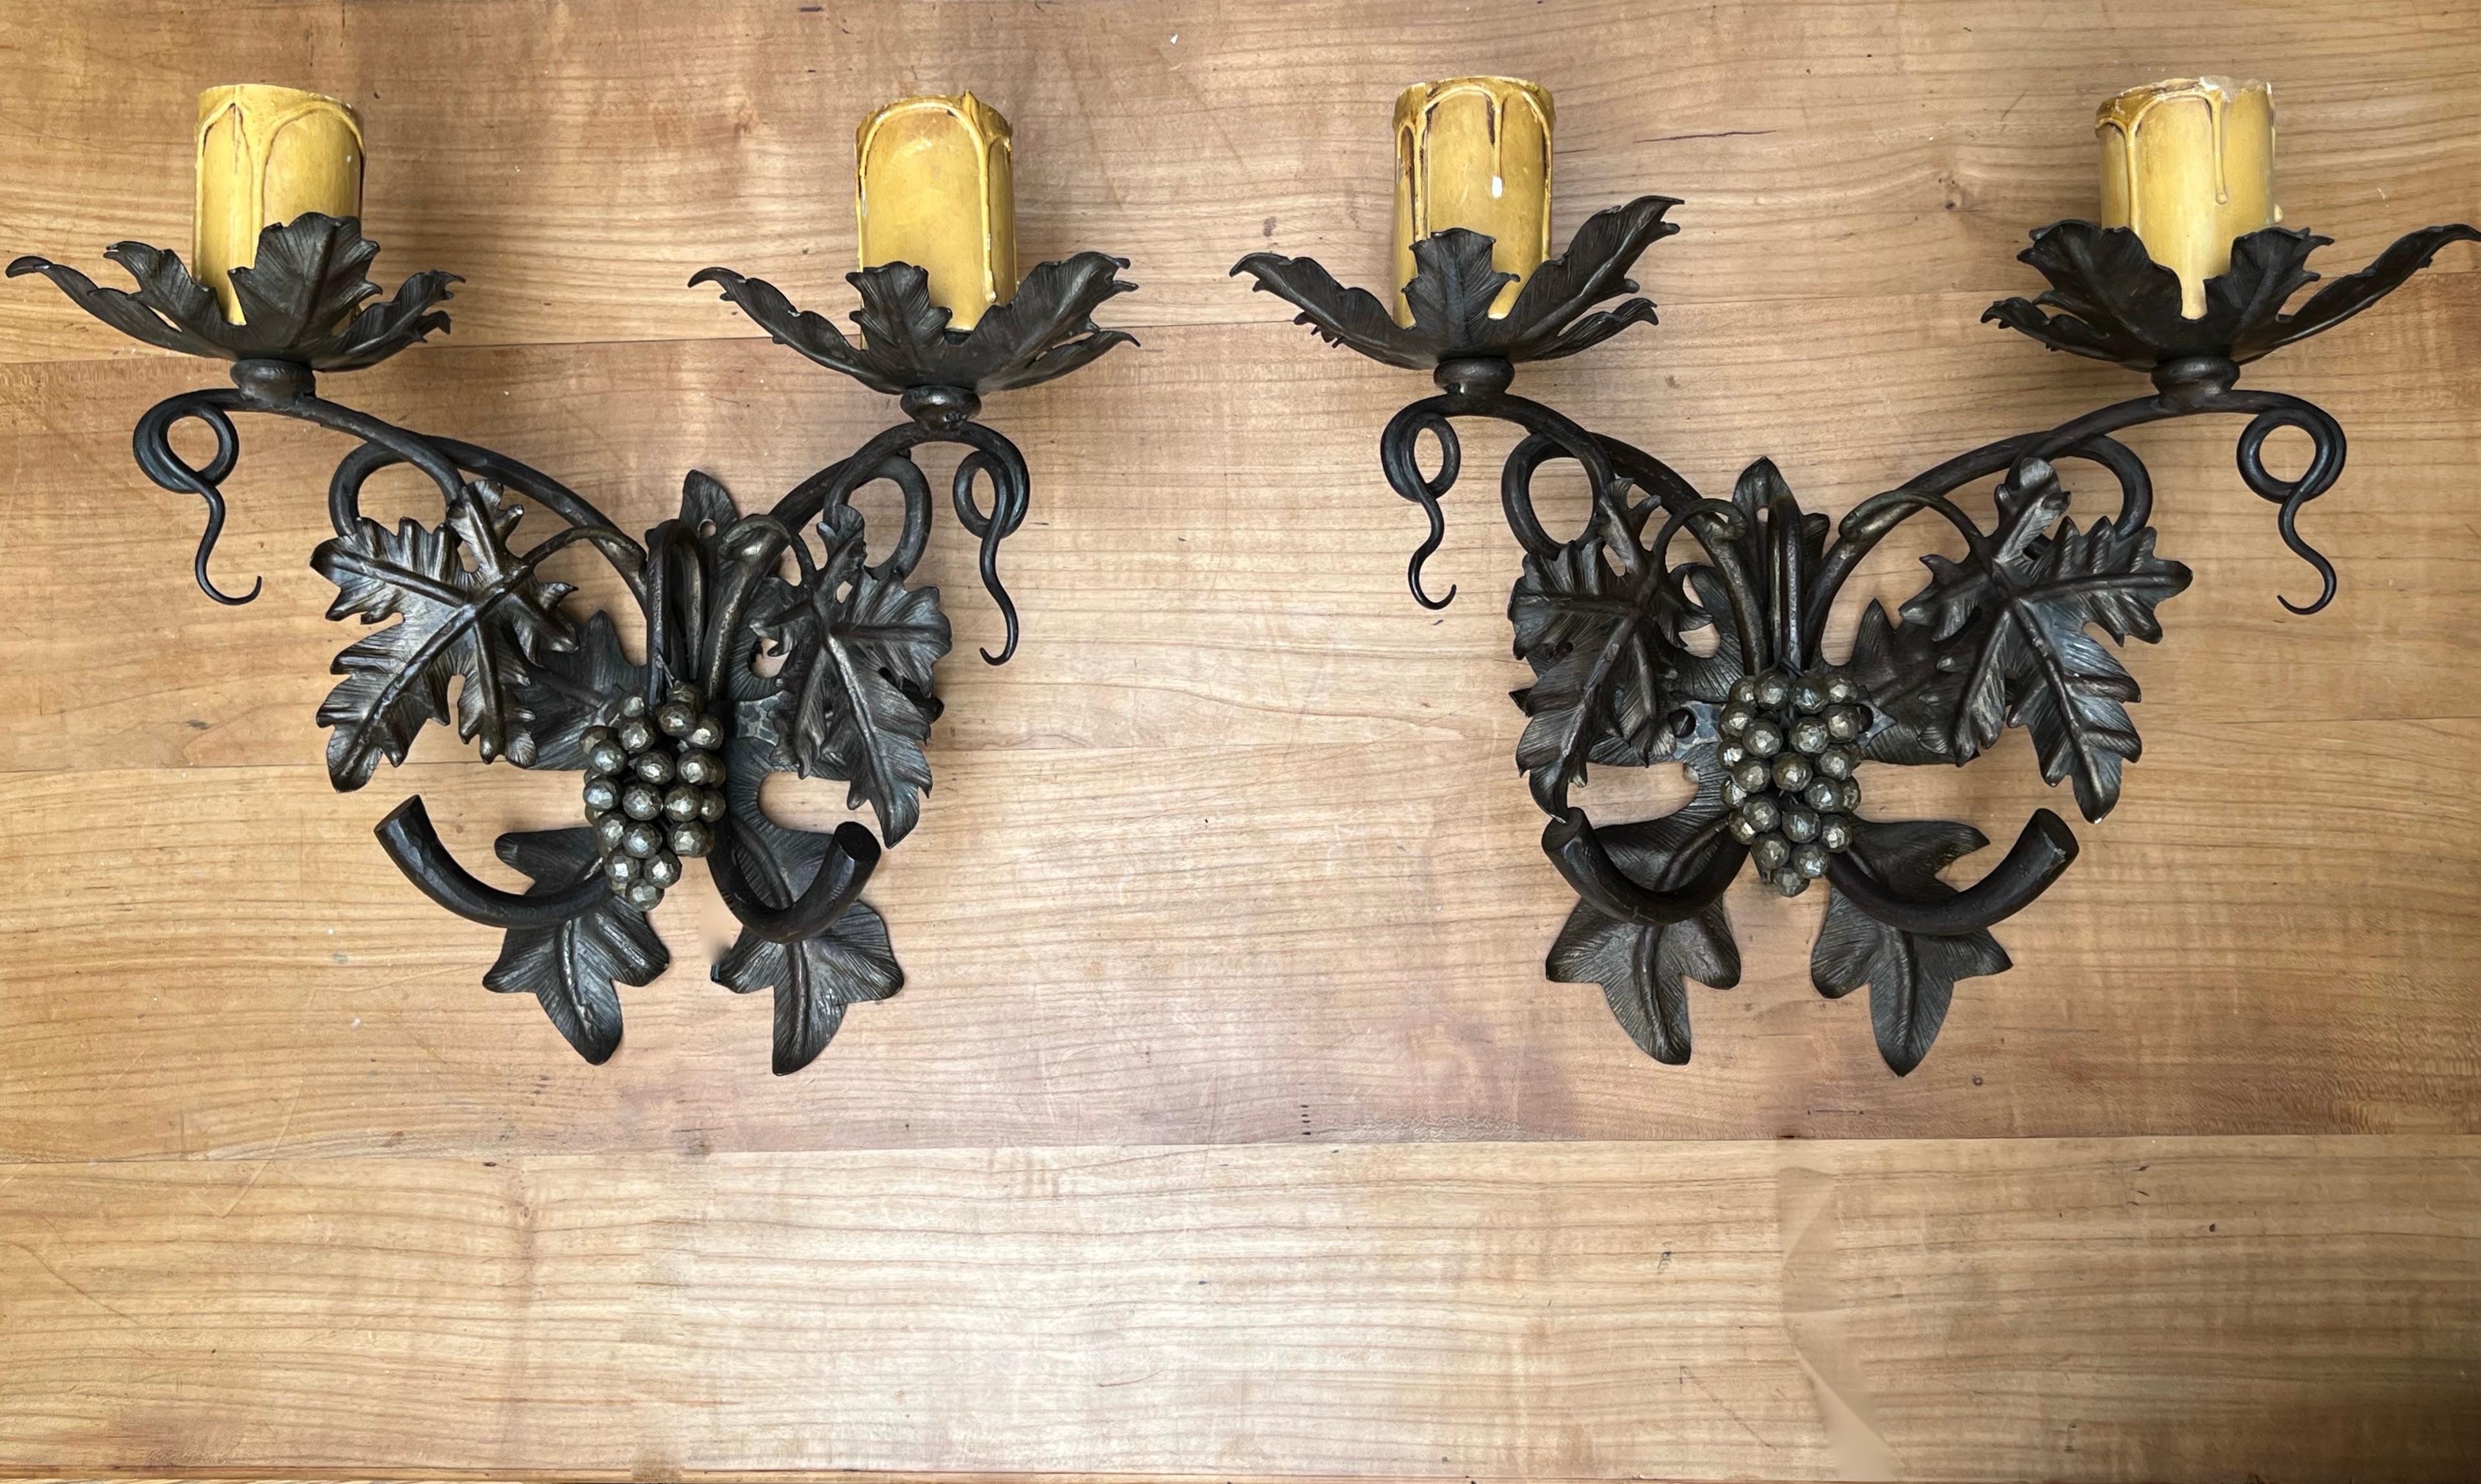 Stylish and highly decorative pair of Arts & Crafts era, work of lighting art sconces.

If you are looking for a pair of elegant and excellent condition, two-light wall sconces to grace a special space then these handcrafted fixtures could be